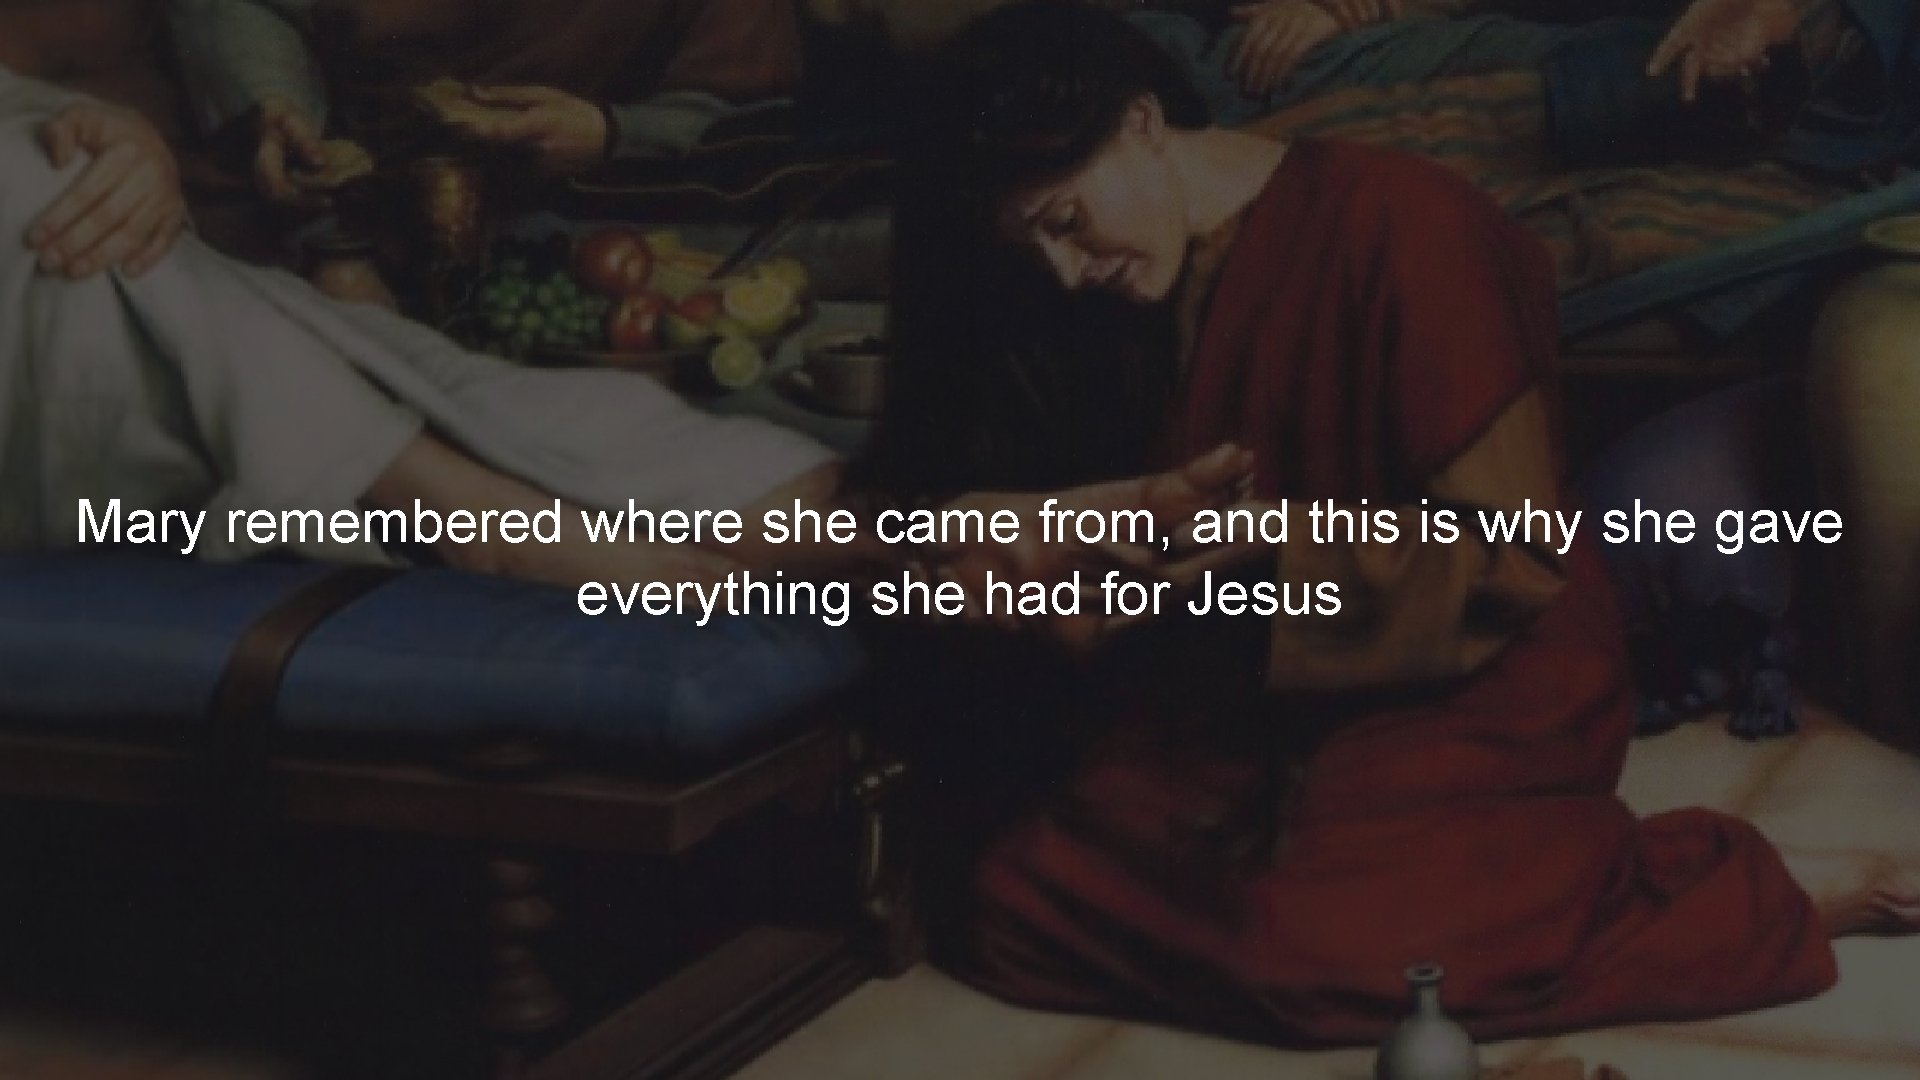 Mary remembered where she came from, and this is why she gave everything she